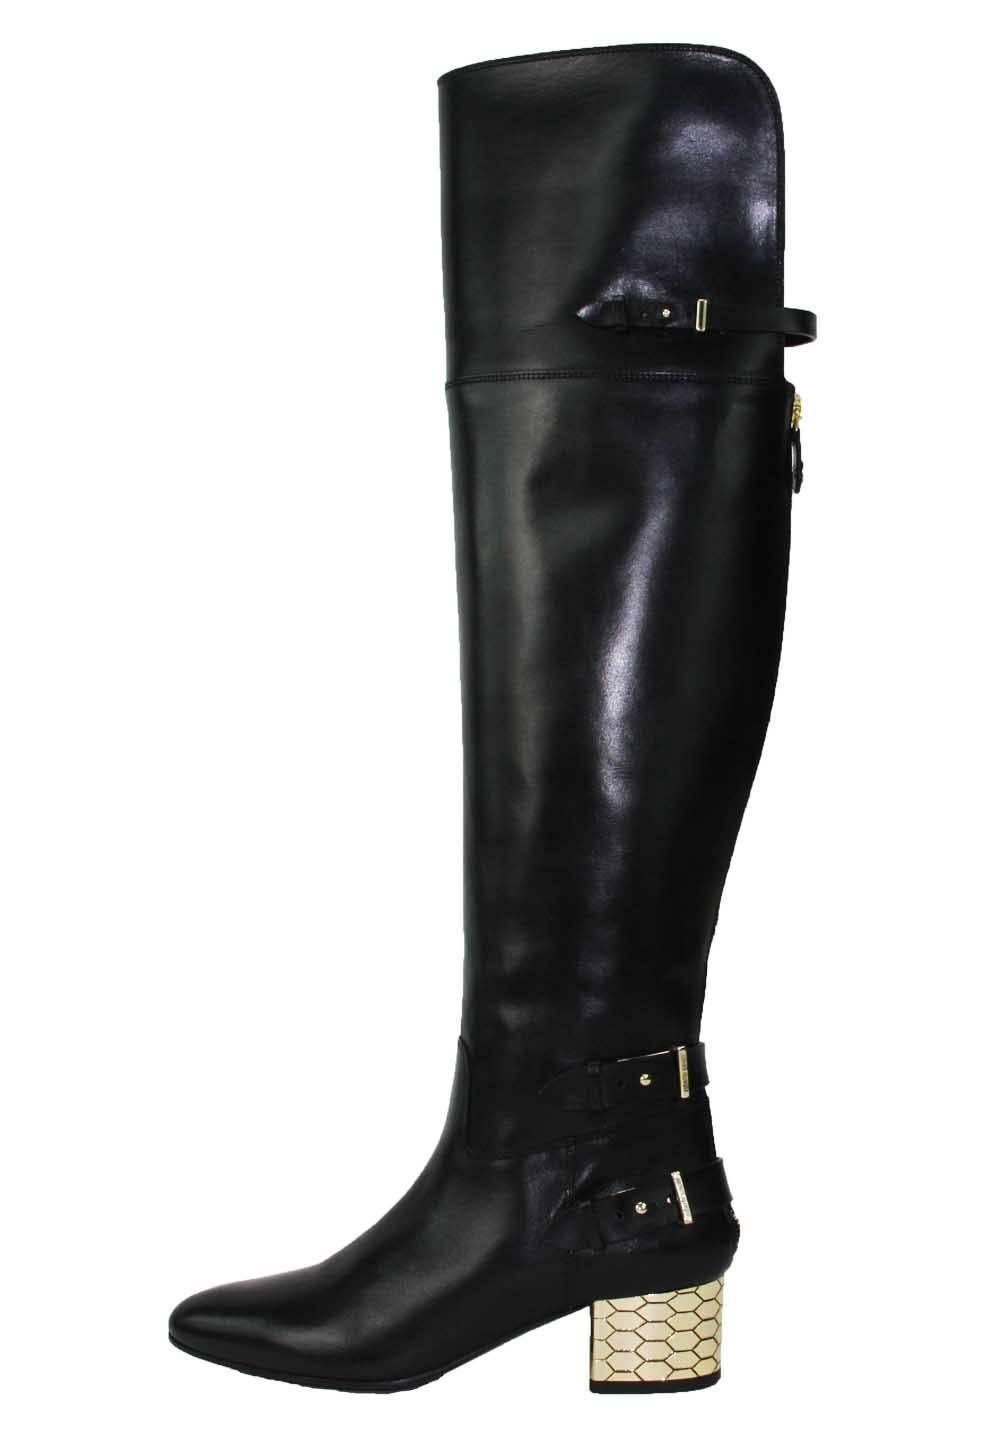 New Roberto Cavalli Over-the-knee Leather Boots Honeycomb Pattern Heel 36.5  6.5 In New Condition For Sale In Montgomery, TX